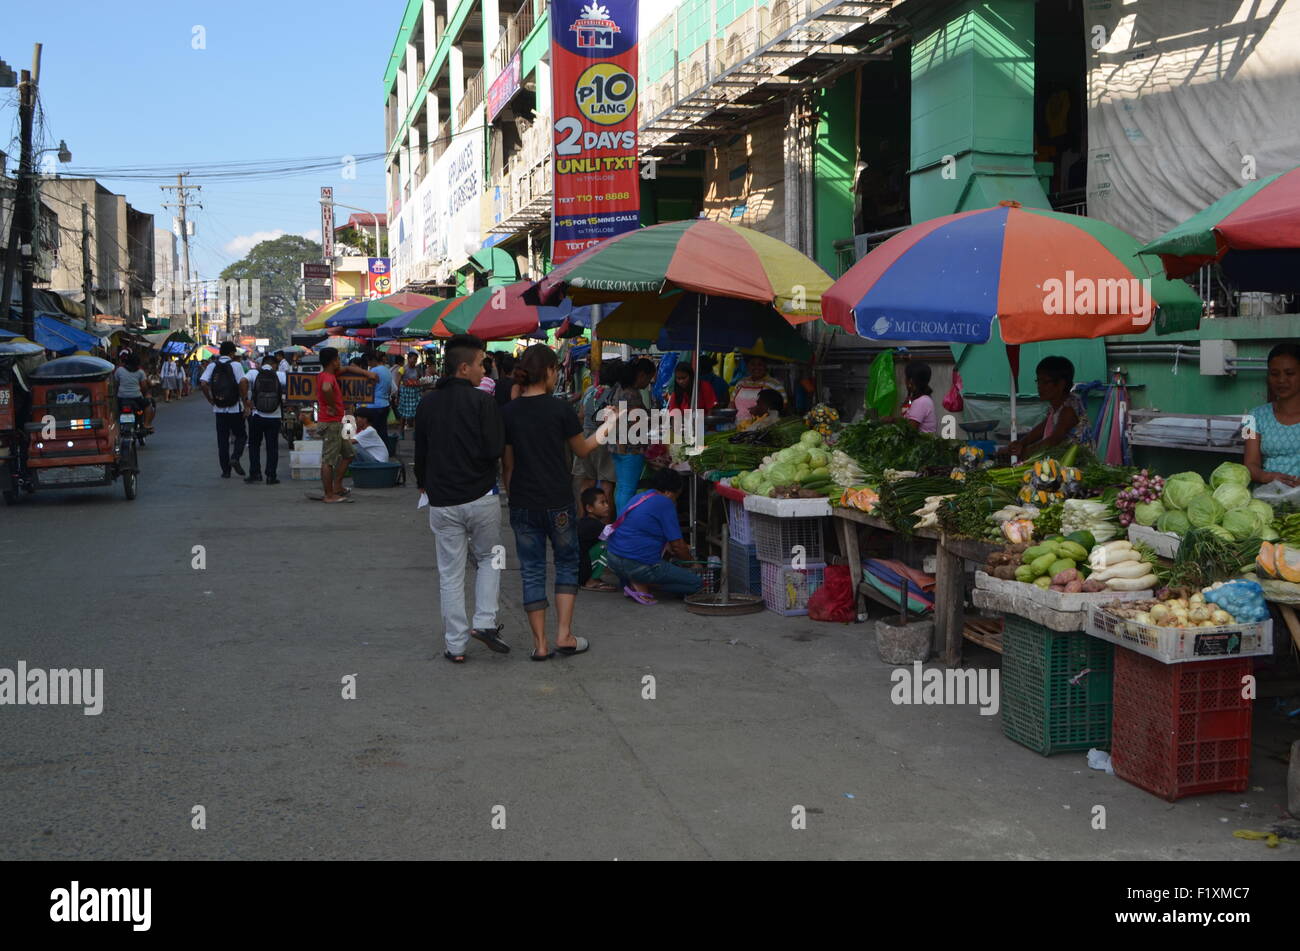 The market place inTugeogharo the northern most state of thePhilippines Streets stalls sellingfresh vegetables to nick nacks Stock Photo